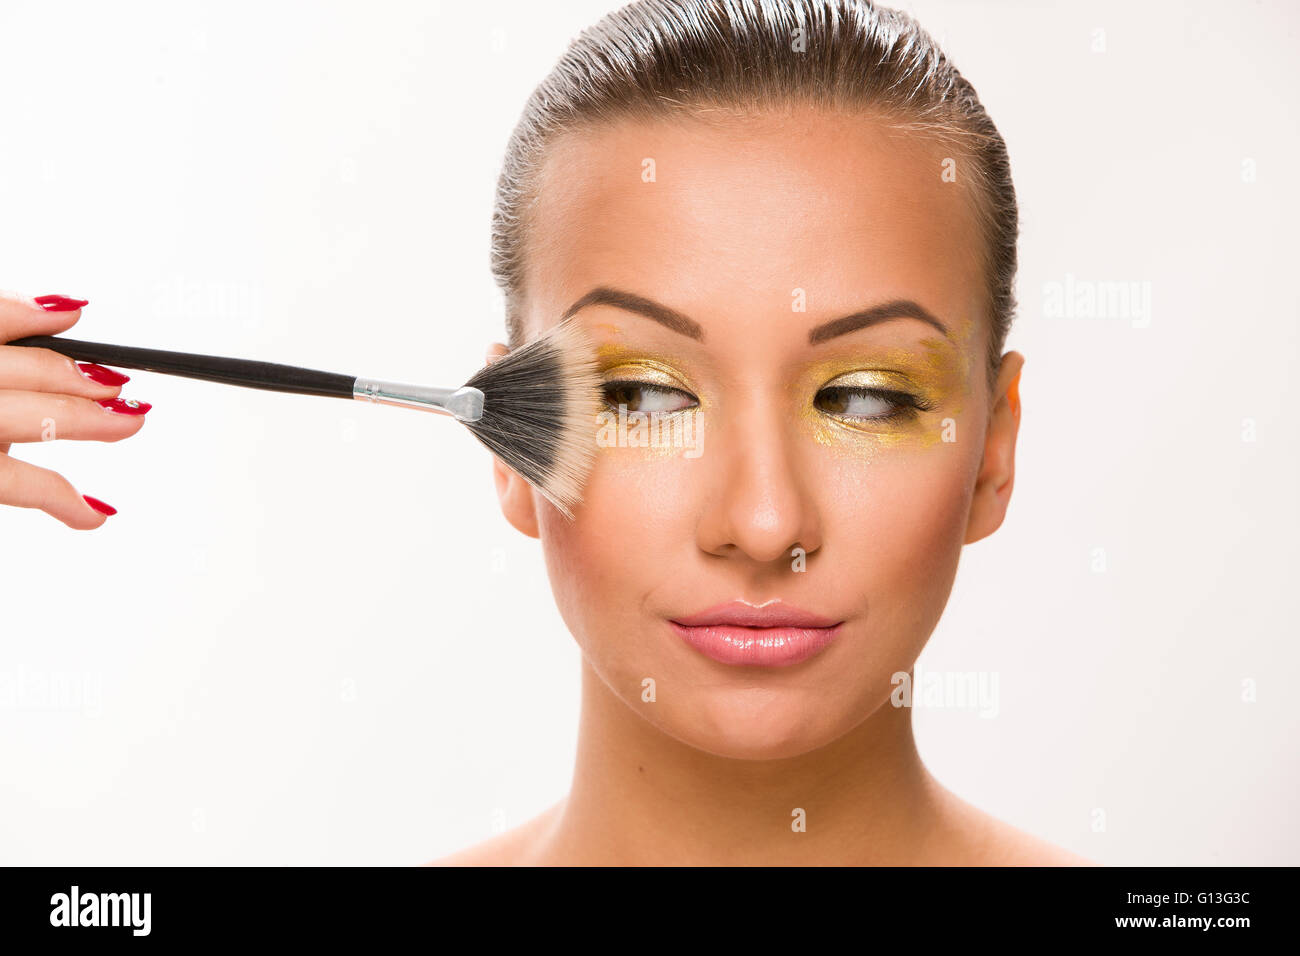 Make up. Brown sleek hair beautiful woman with fan brush close to face. Stock Photo